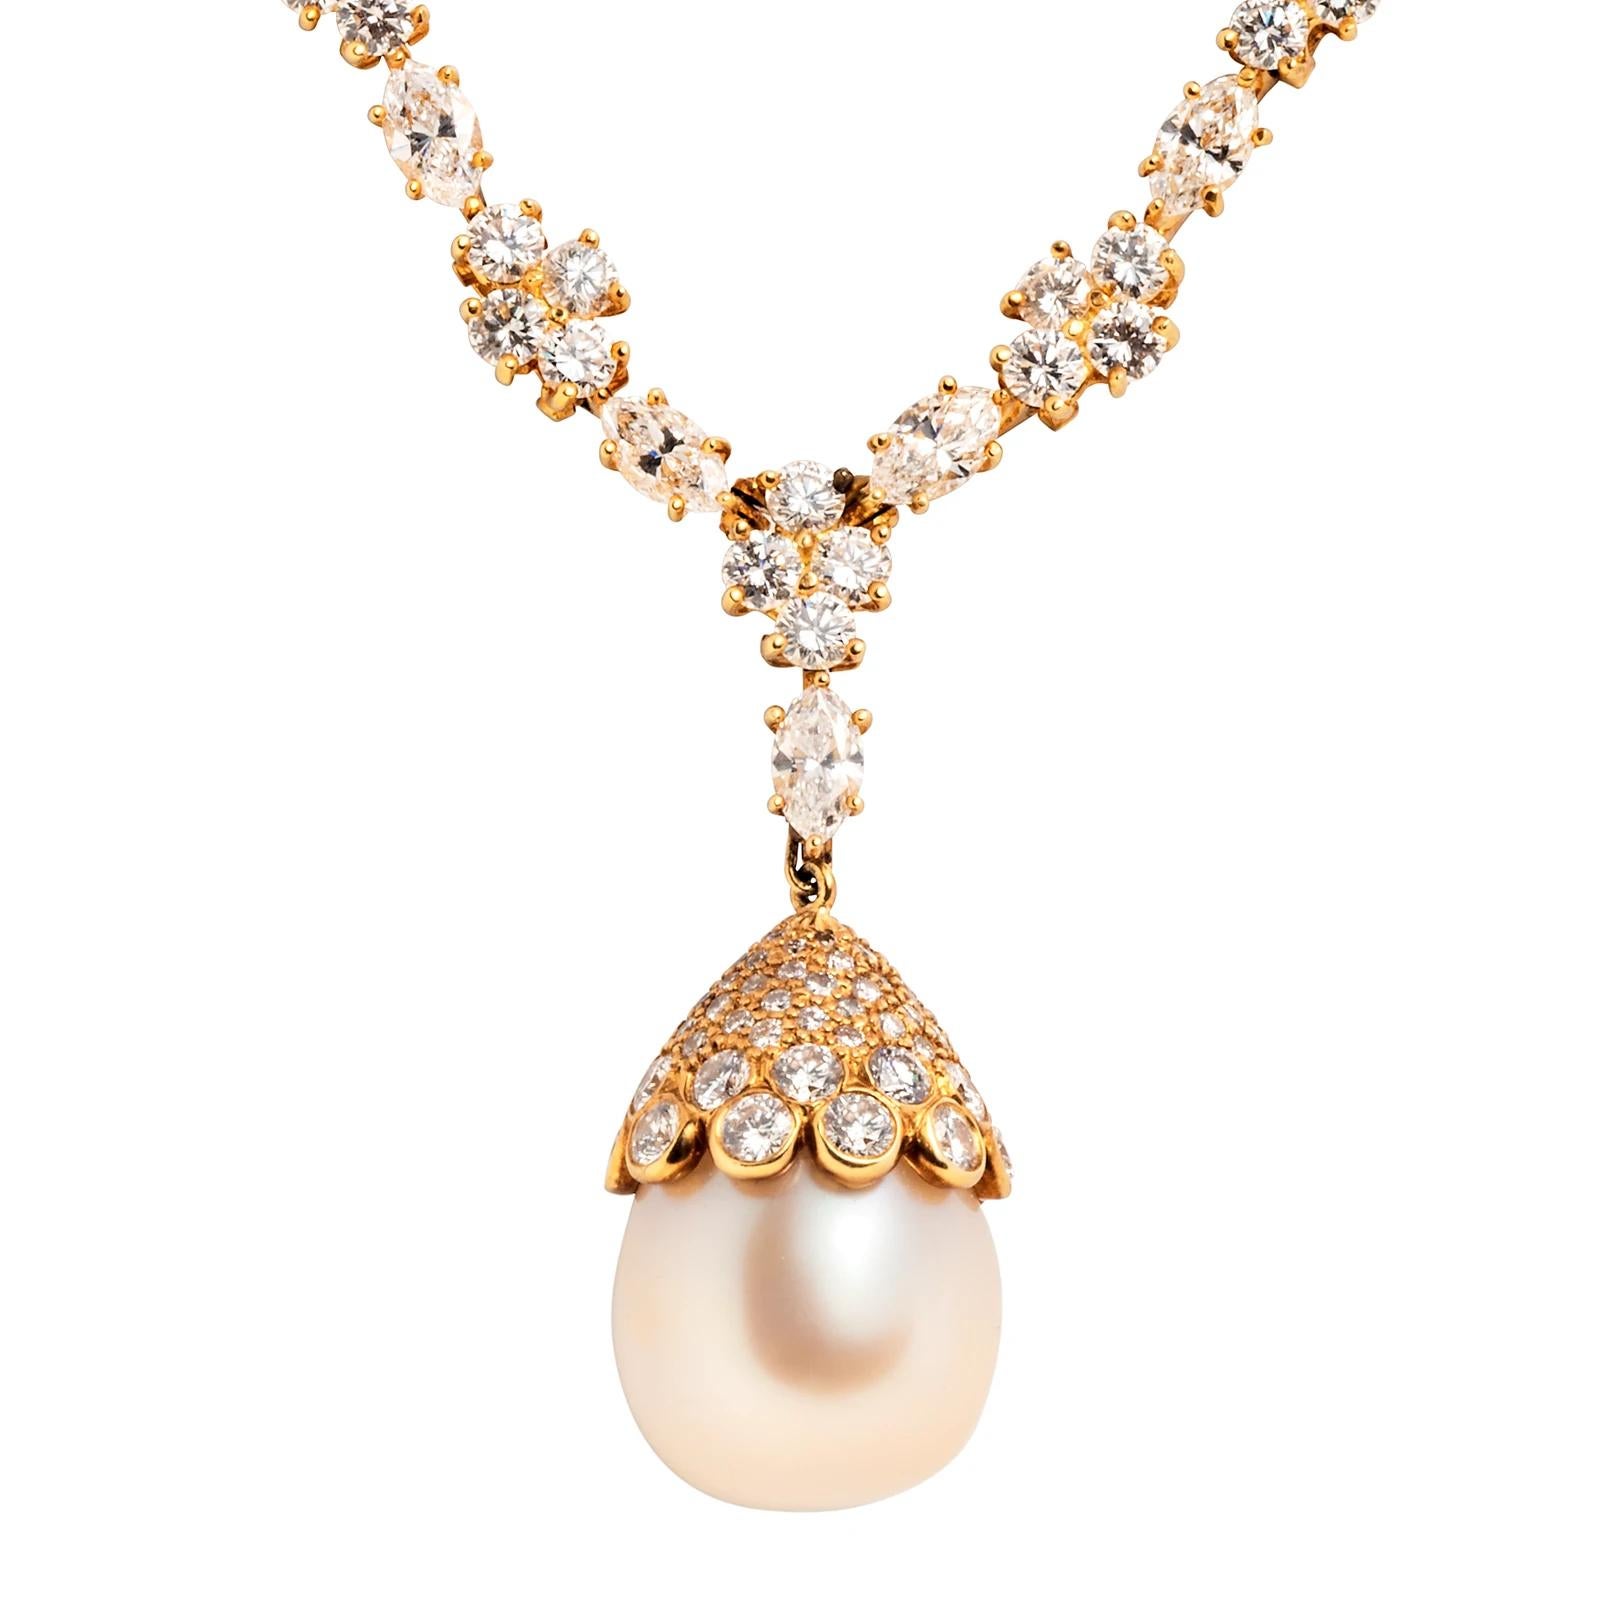 The master craftsmen of Harry Winston have used over 20 carats of diamonds to create this elegant flower garland necklace which centers on an acorn-form cultured pearl drop. The design is completed by a substantial diamond flower clasp.

16” in